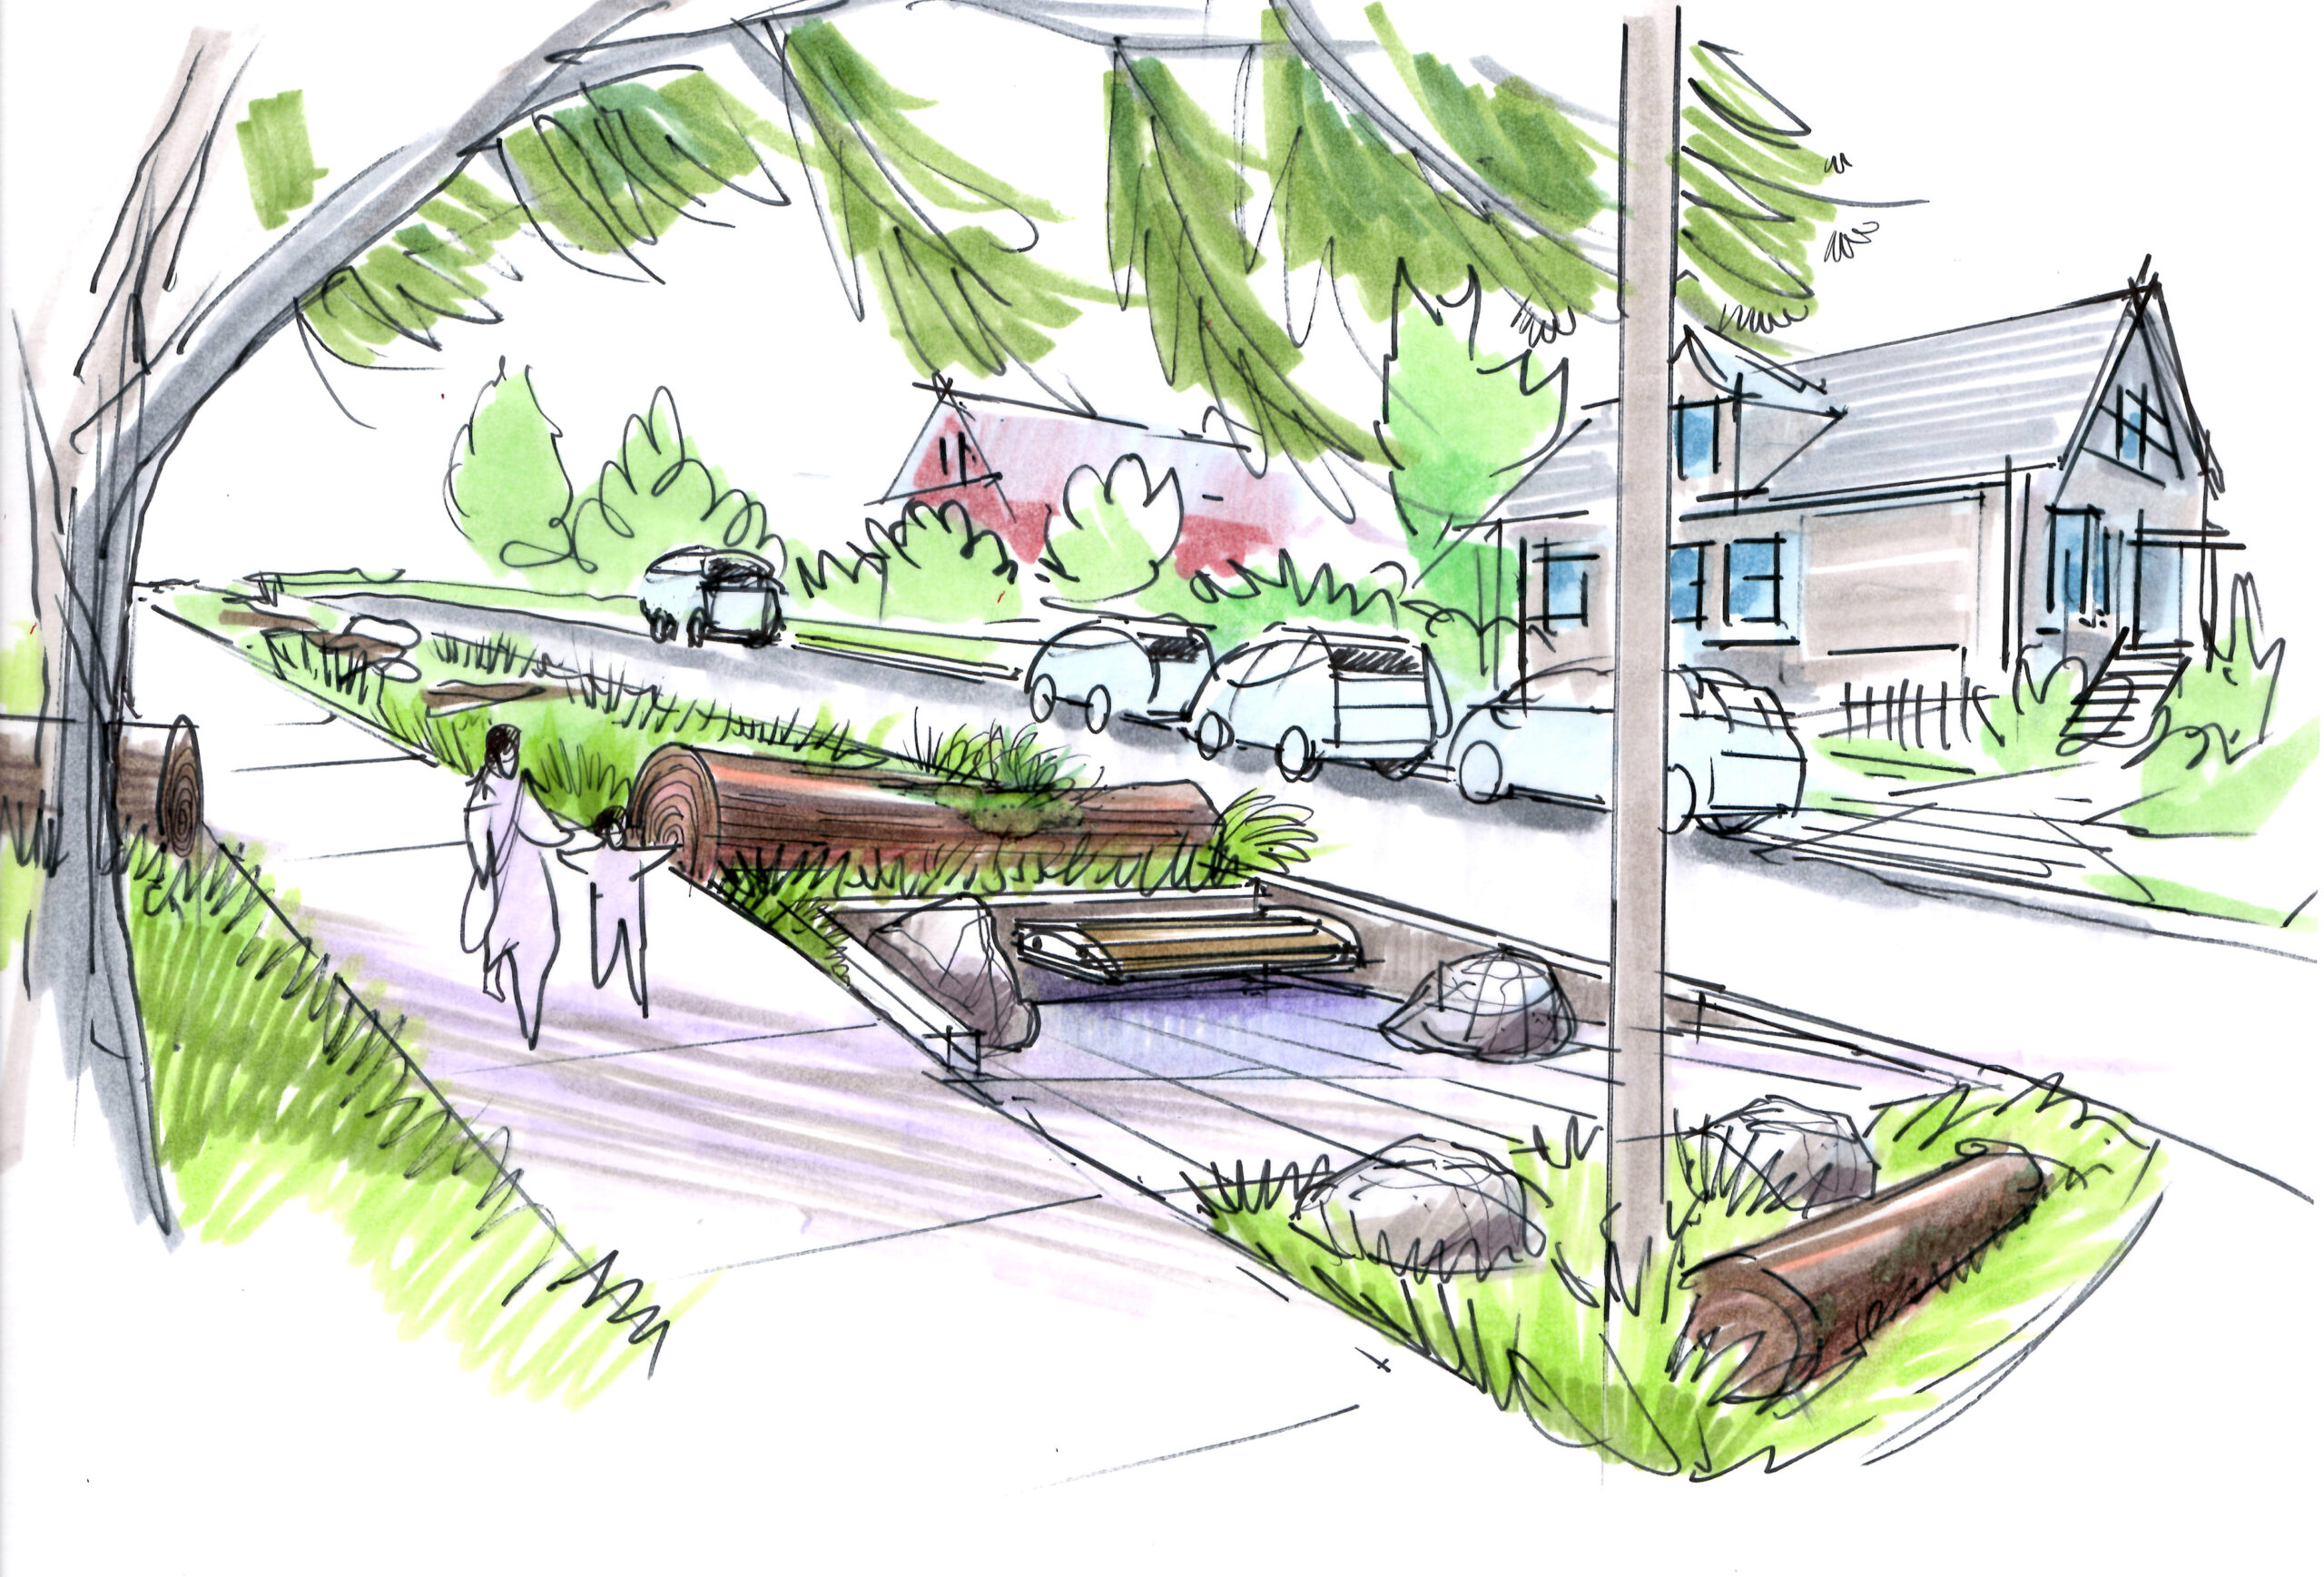 Illustration of the end of the rainway showing nurse logs and a bench with two people walking along the sidewalk